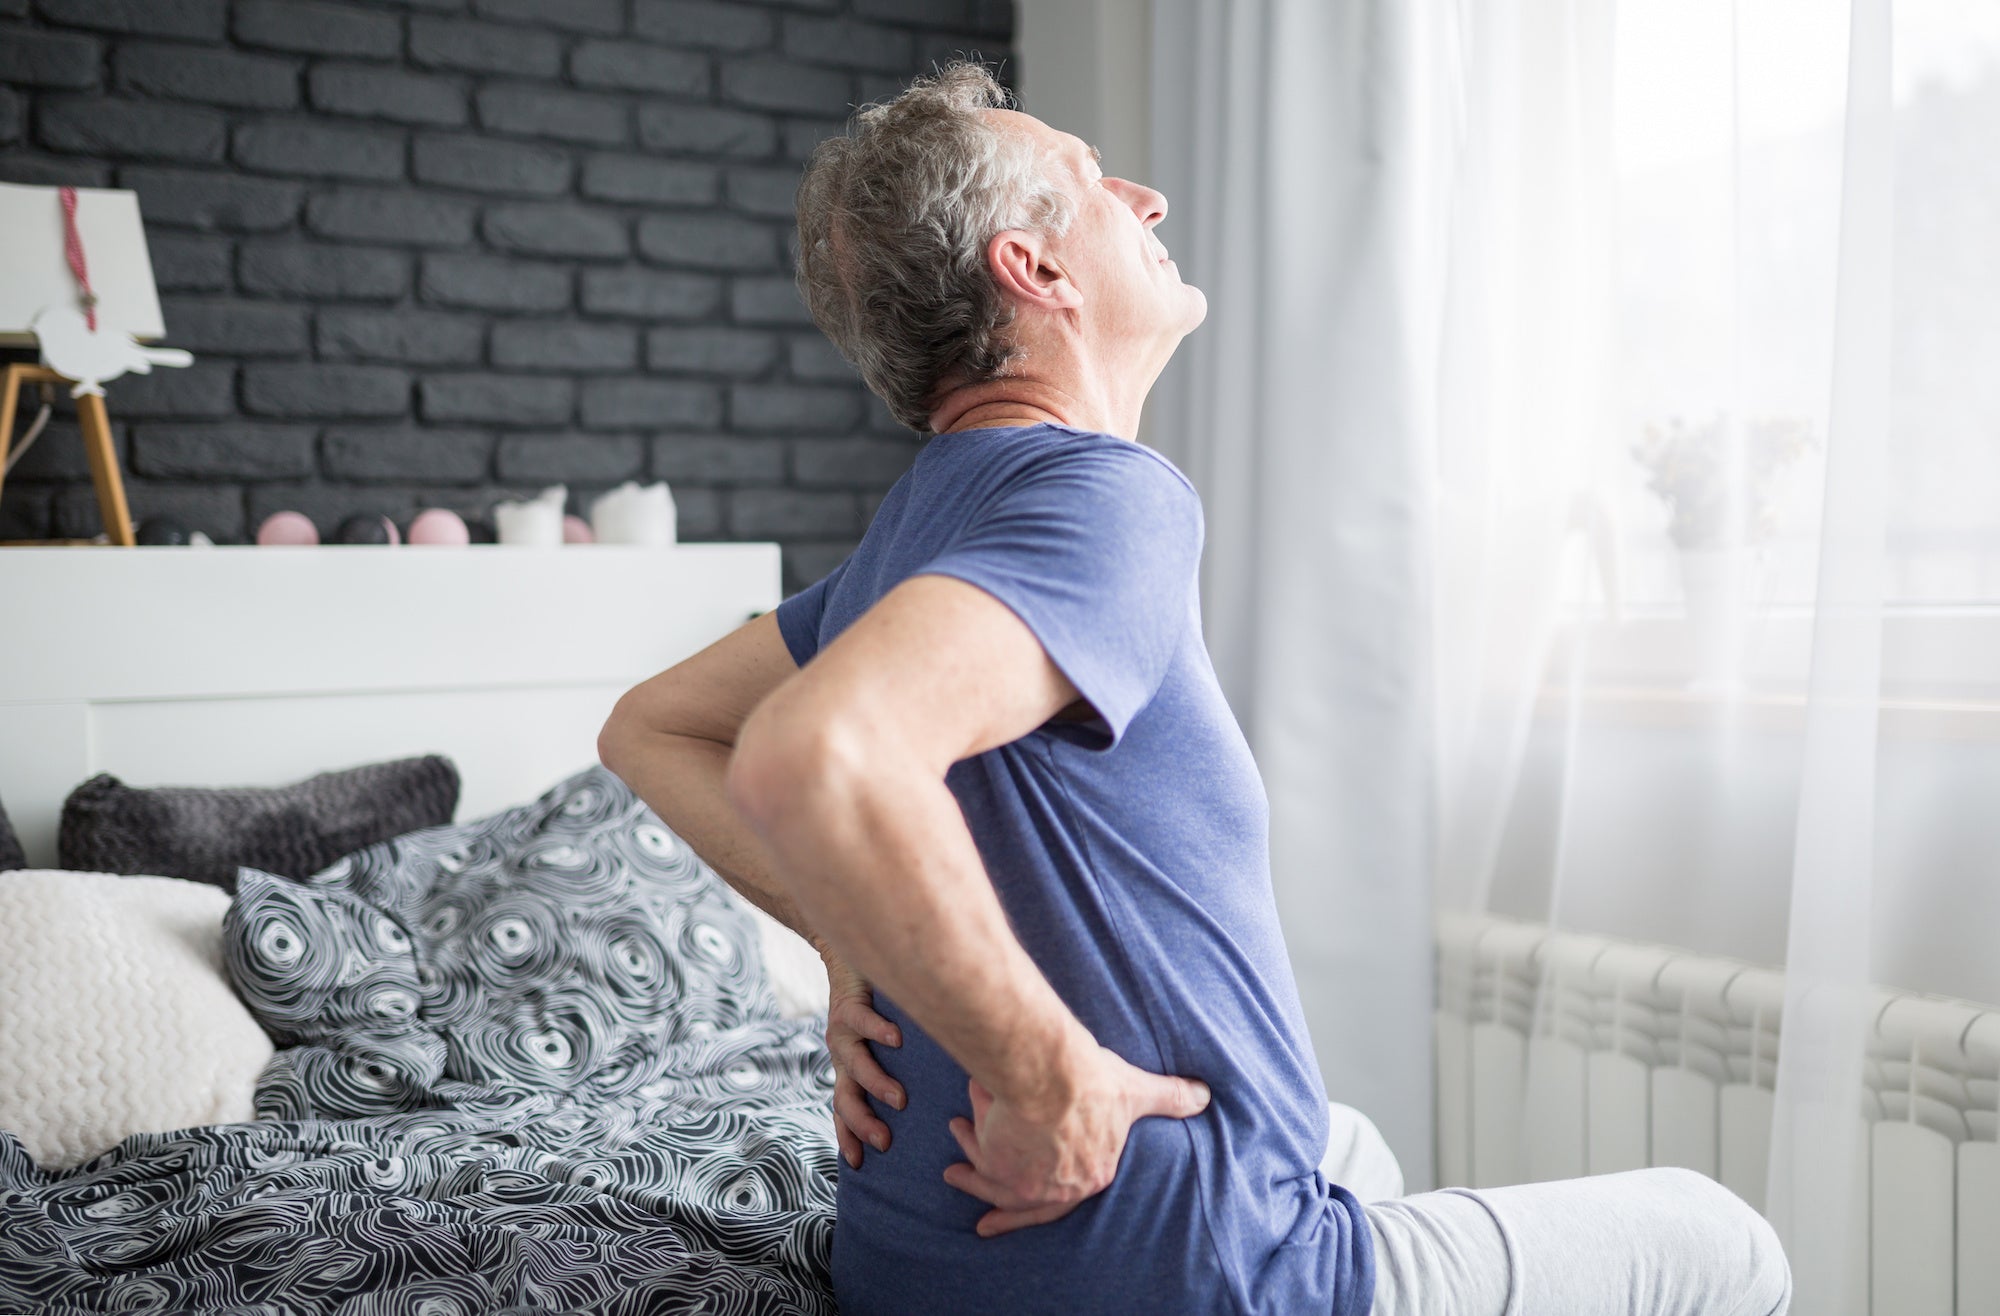 Could Your Lower Back Pain Be Ankylosing Spondylitis?